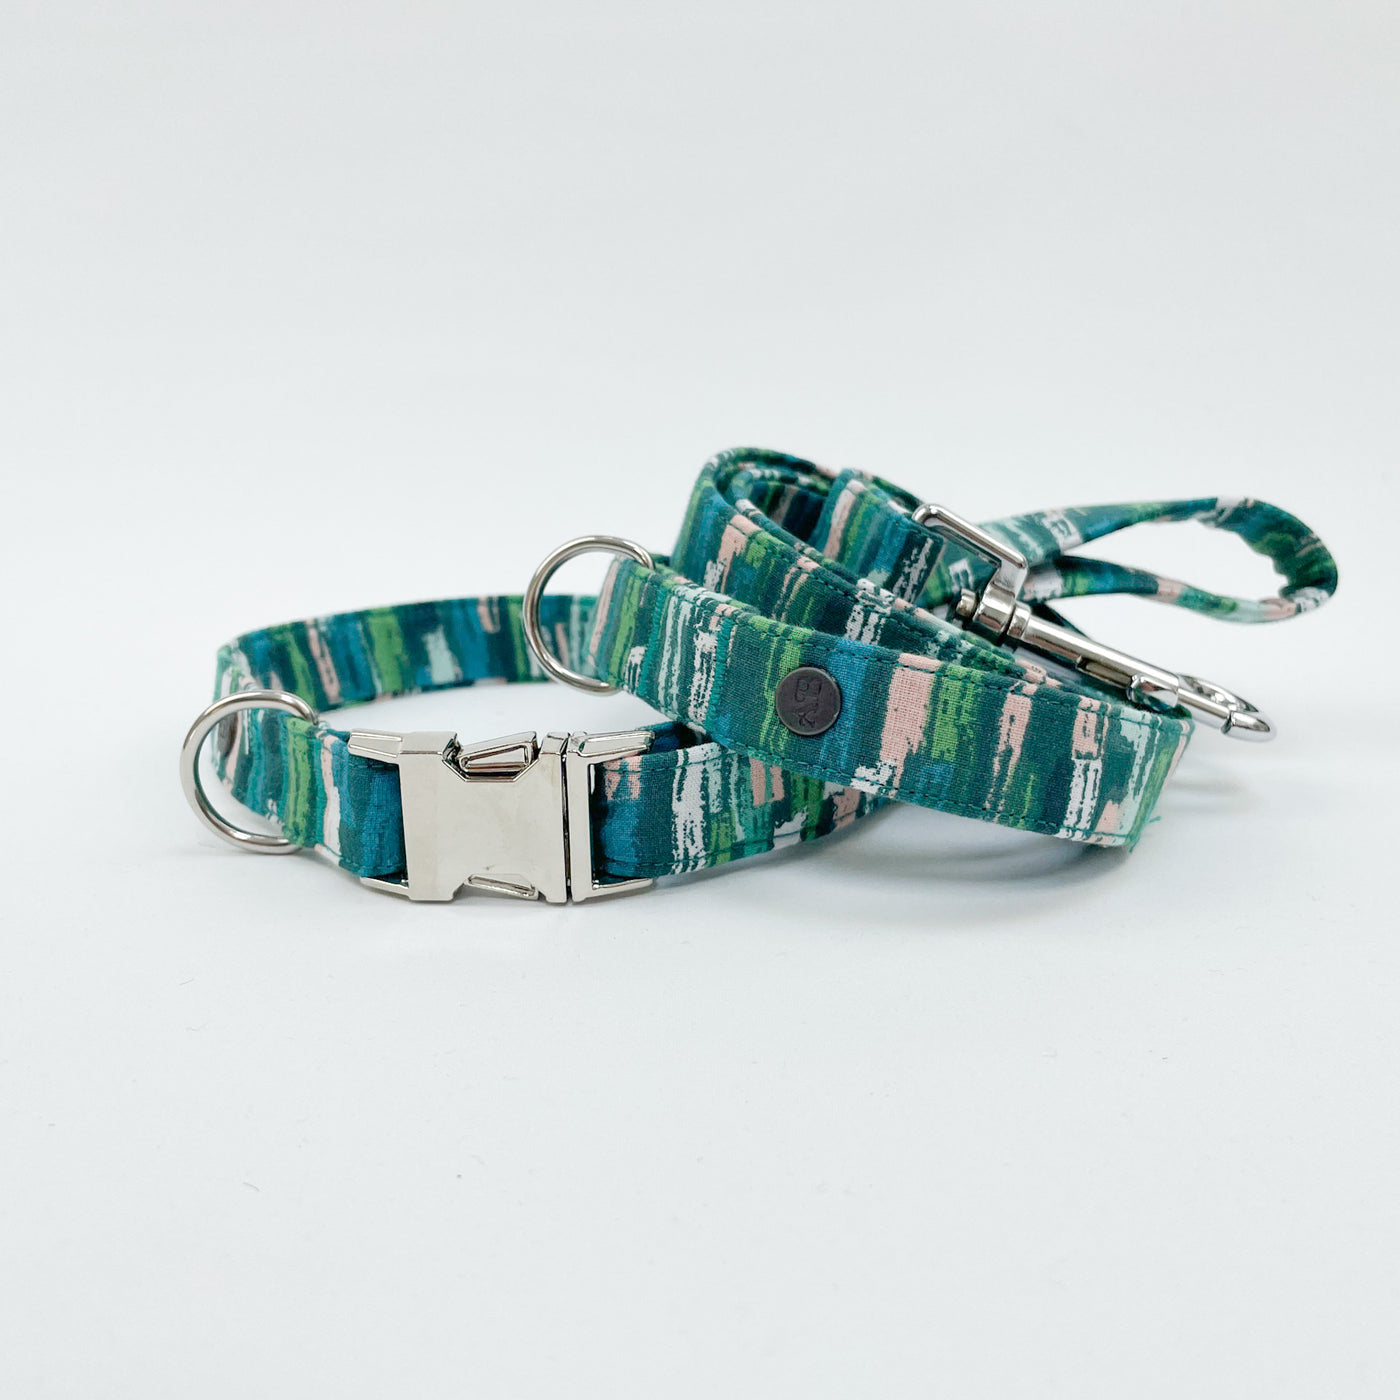 Autumn Stripe collar and lead for dogs.